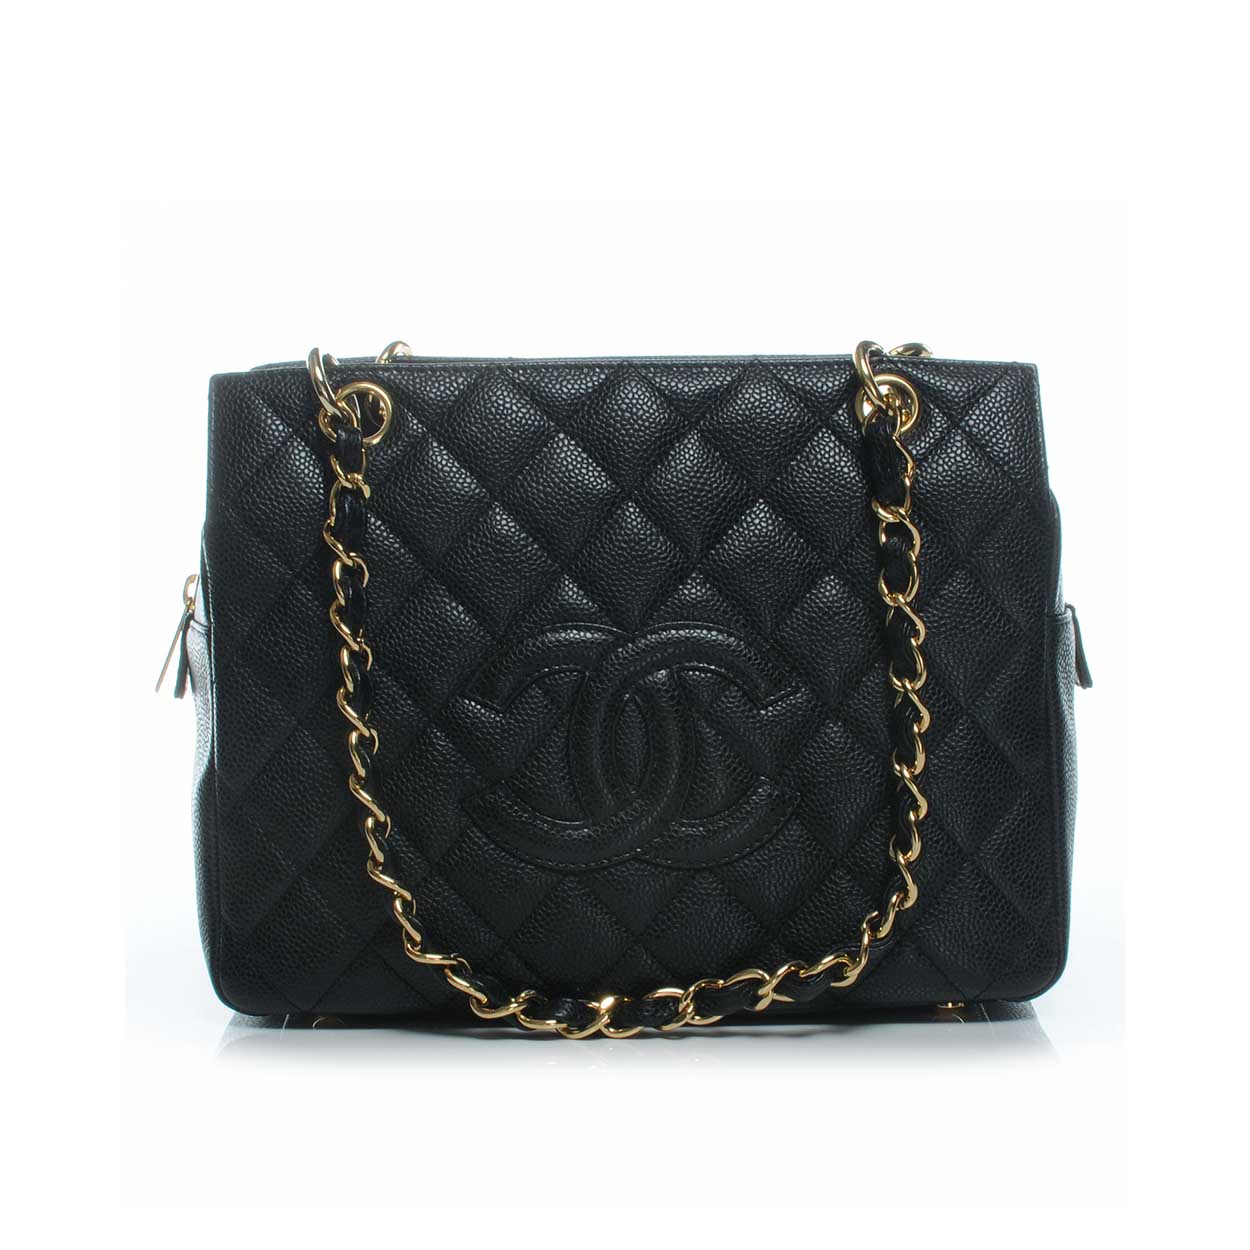 CHANEL Caviar Leather Petite Timeless Shopping Tote Black | Luxity